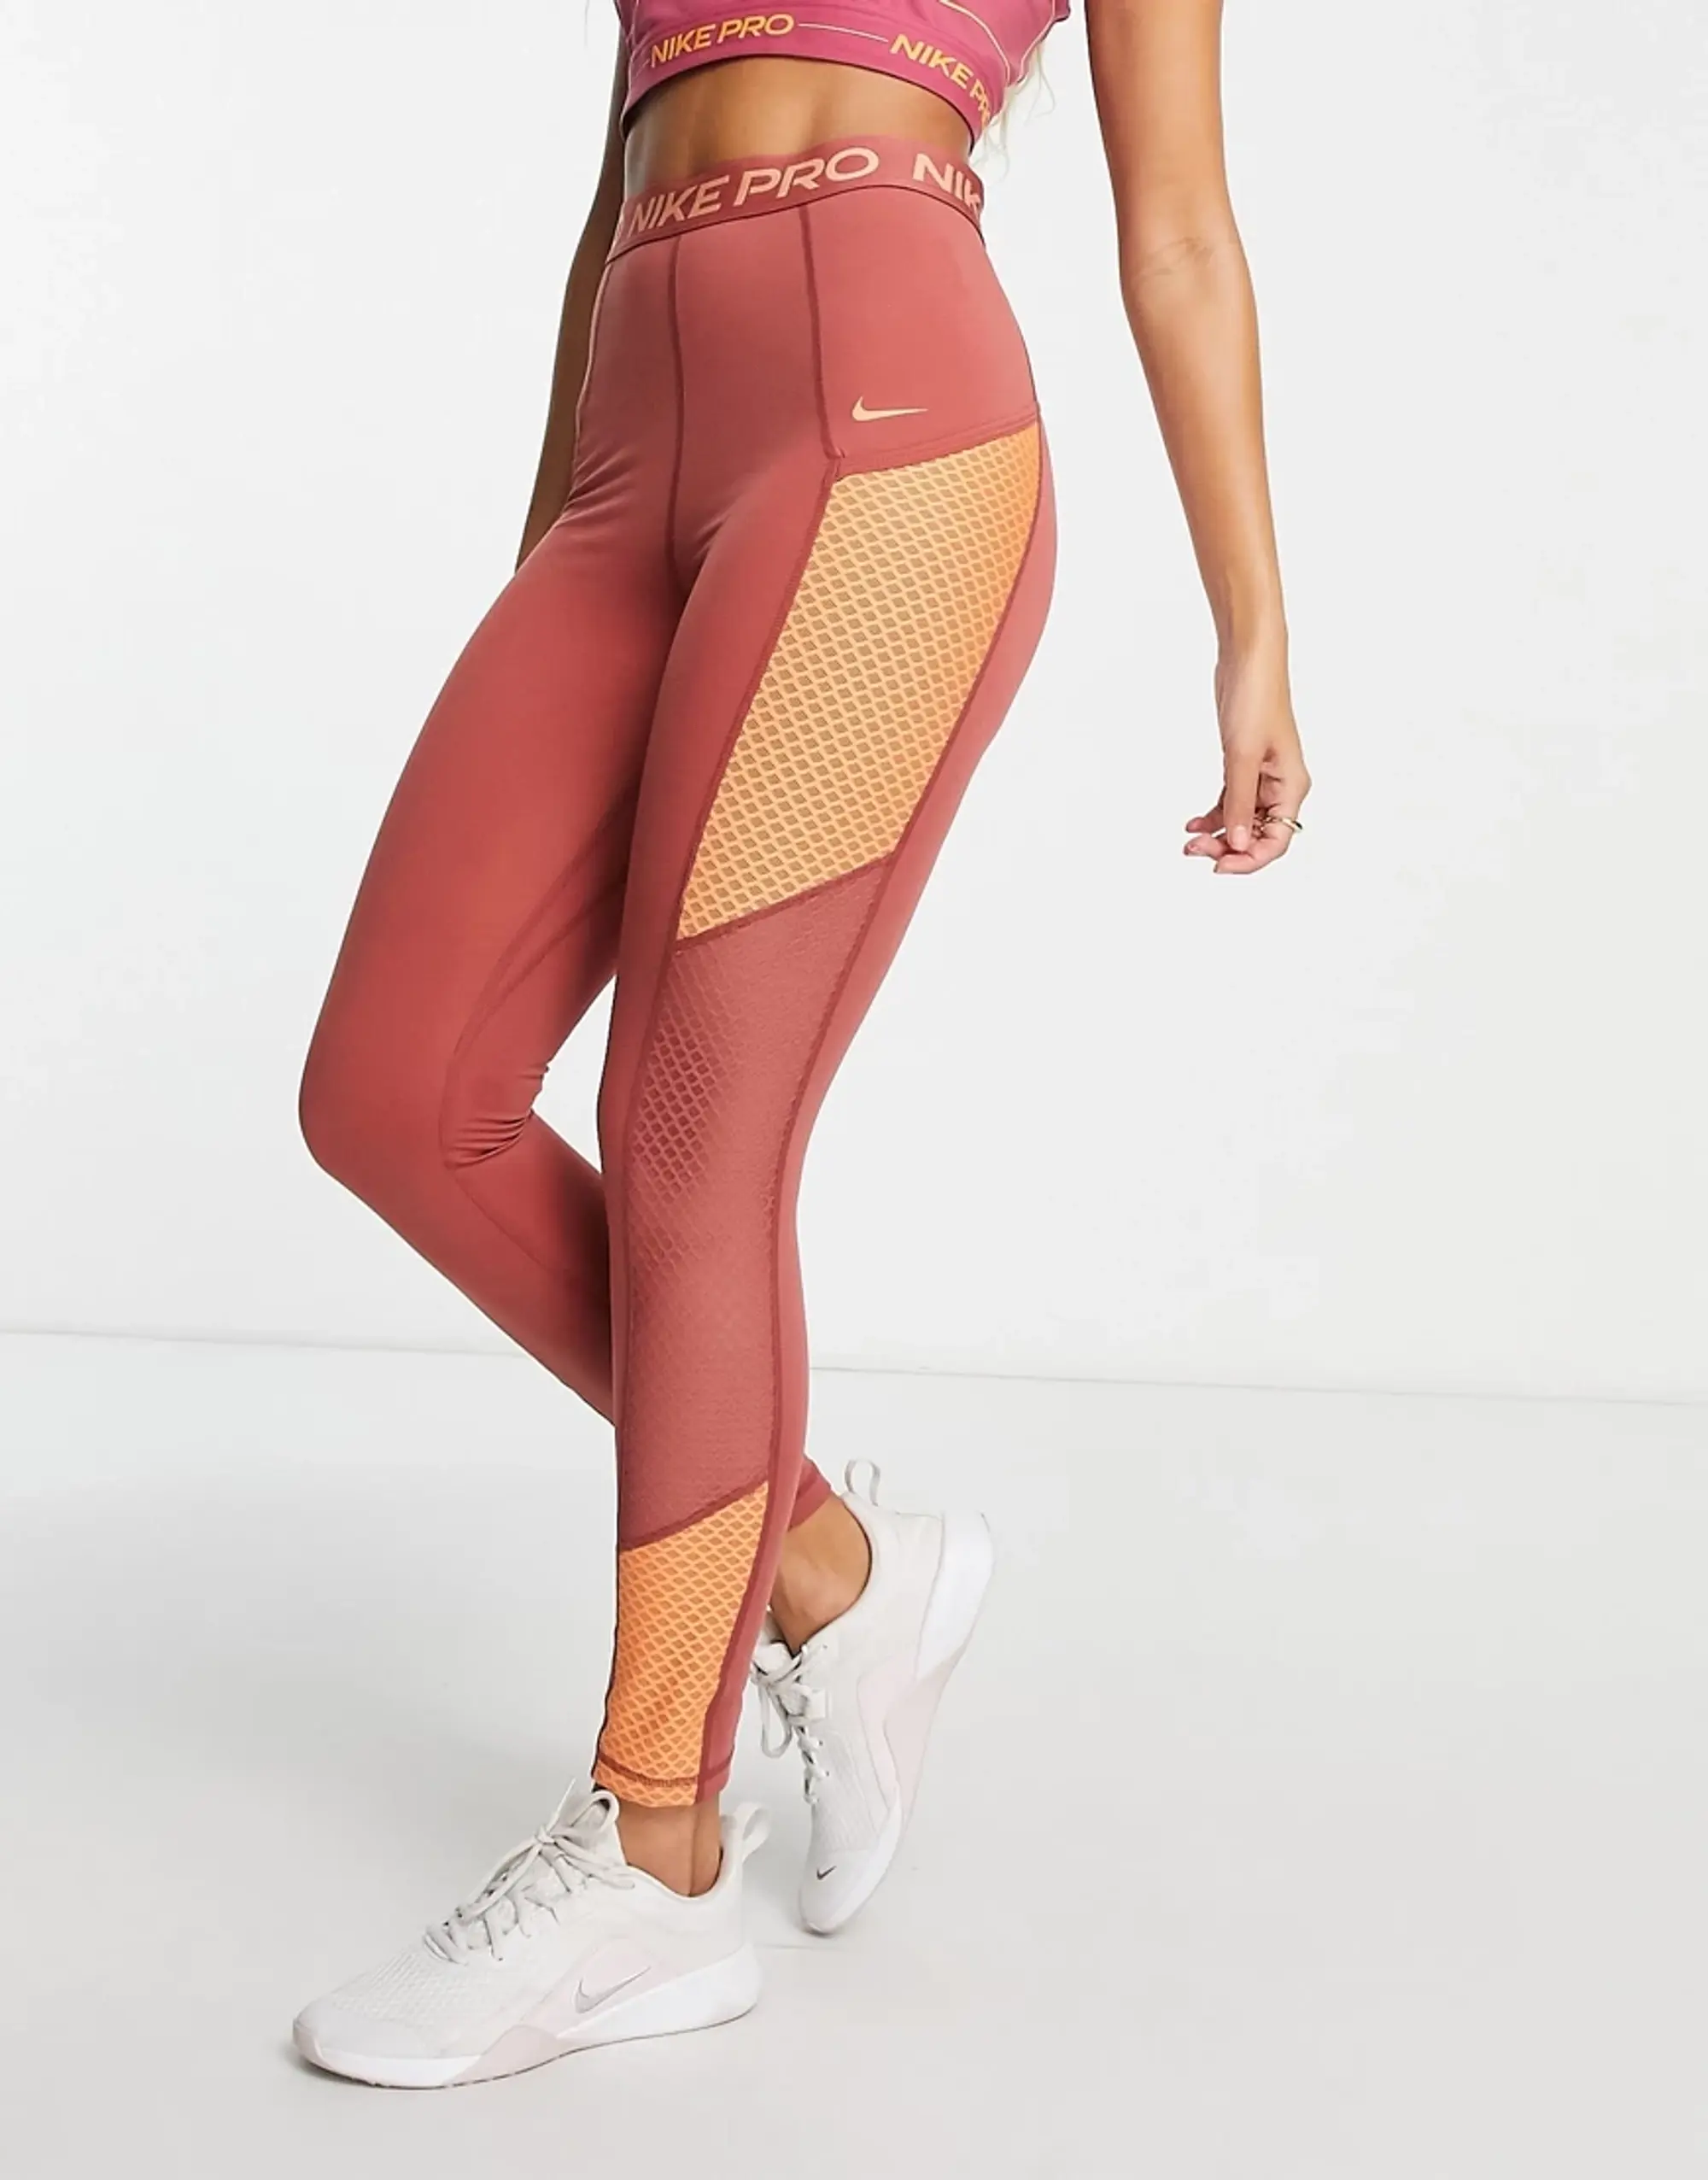 Nike Pro Training Femme Dri-Fit High Rise Leggings In Pink-Red, DQ5588-691